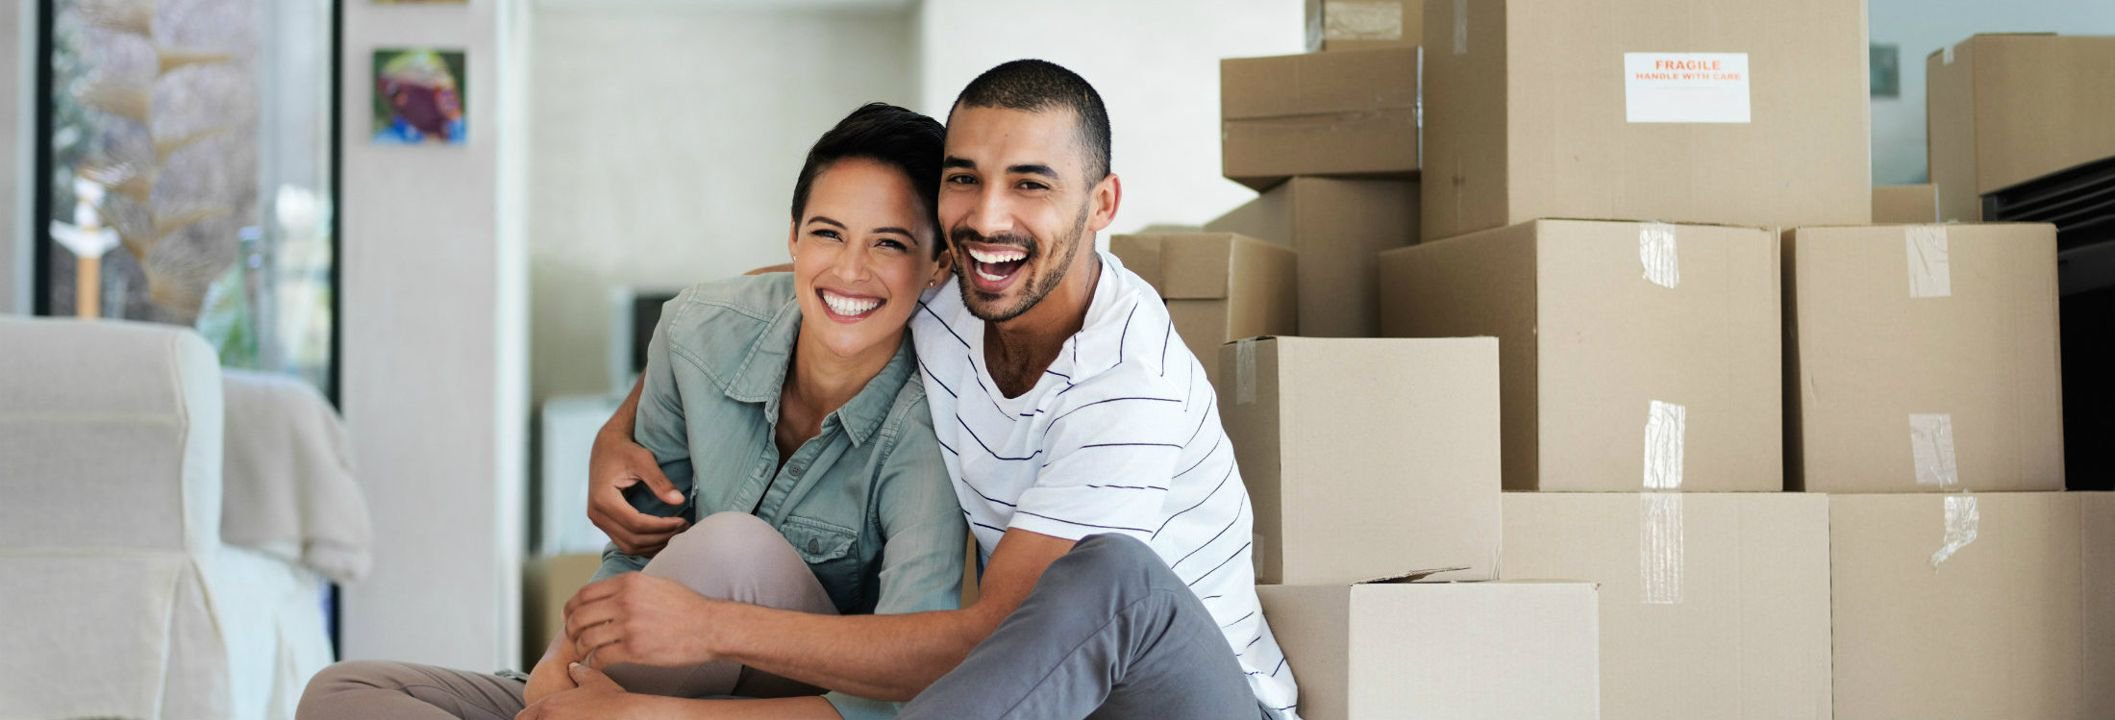 Silicon Valley Relocation Services, corporate relocation realtor package in California